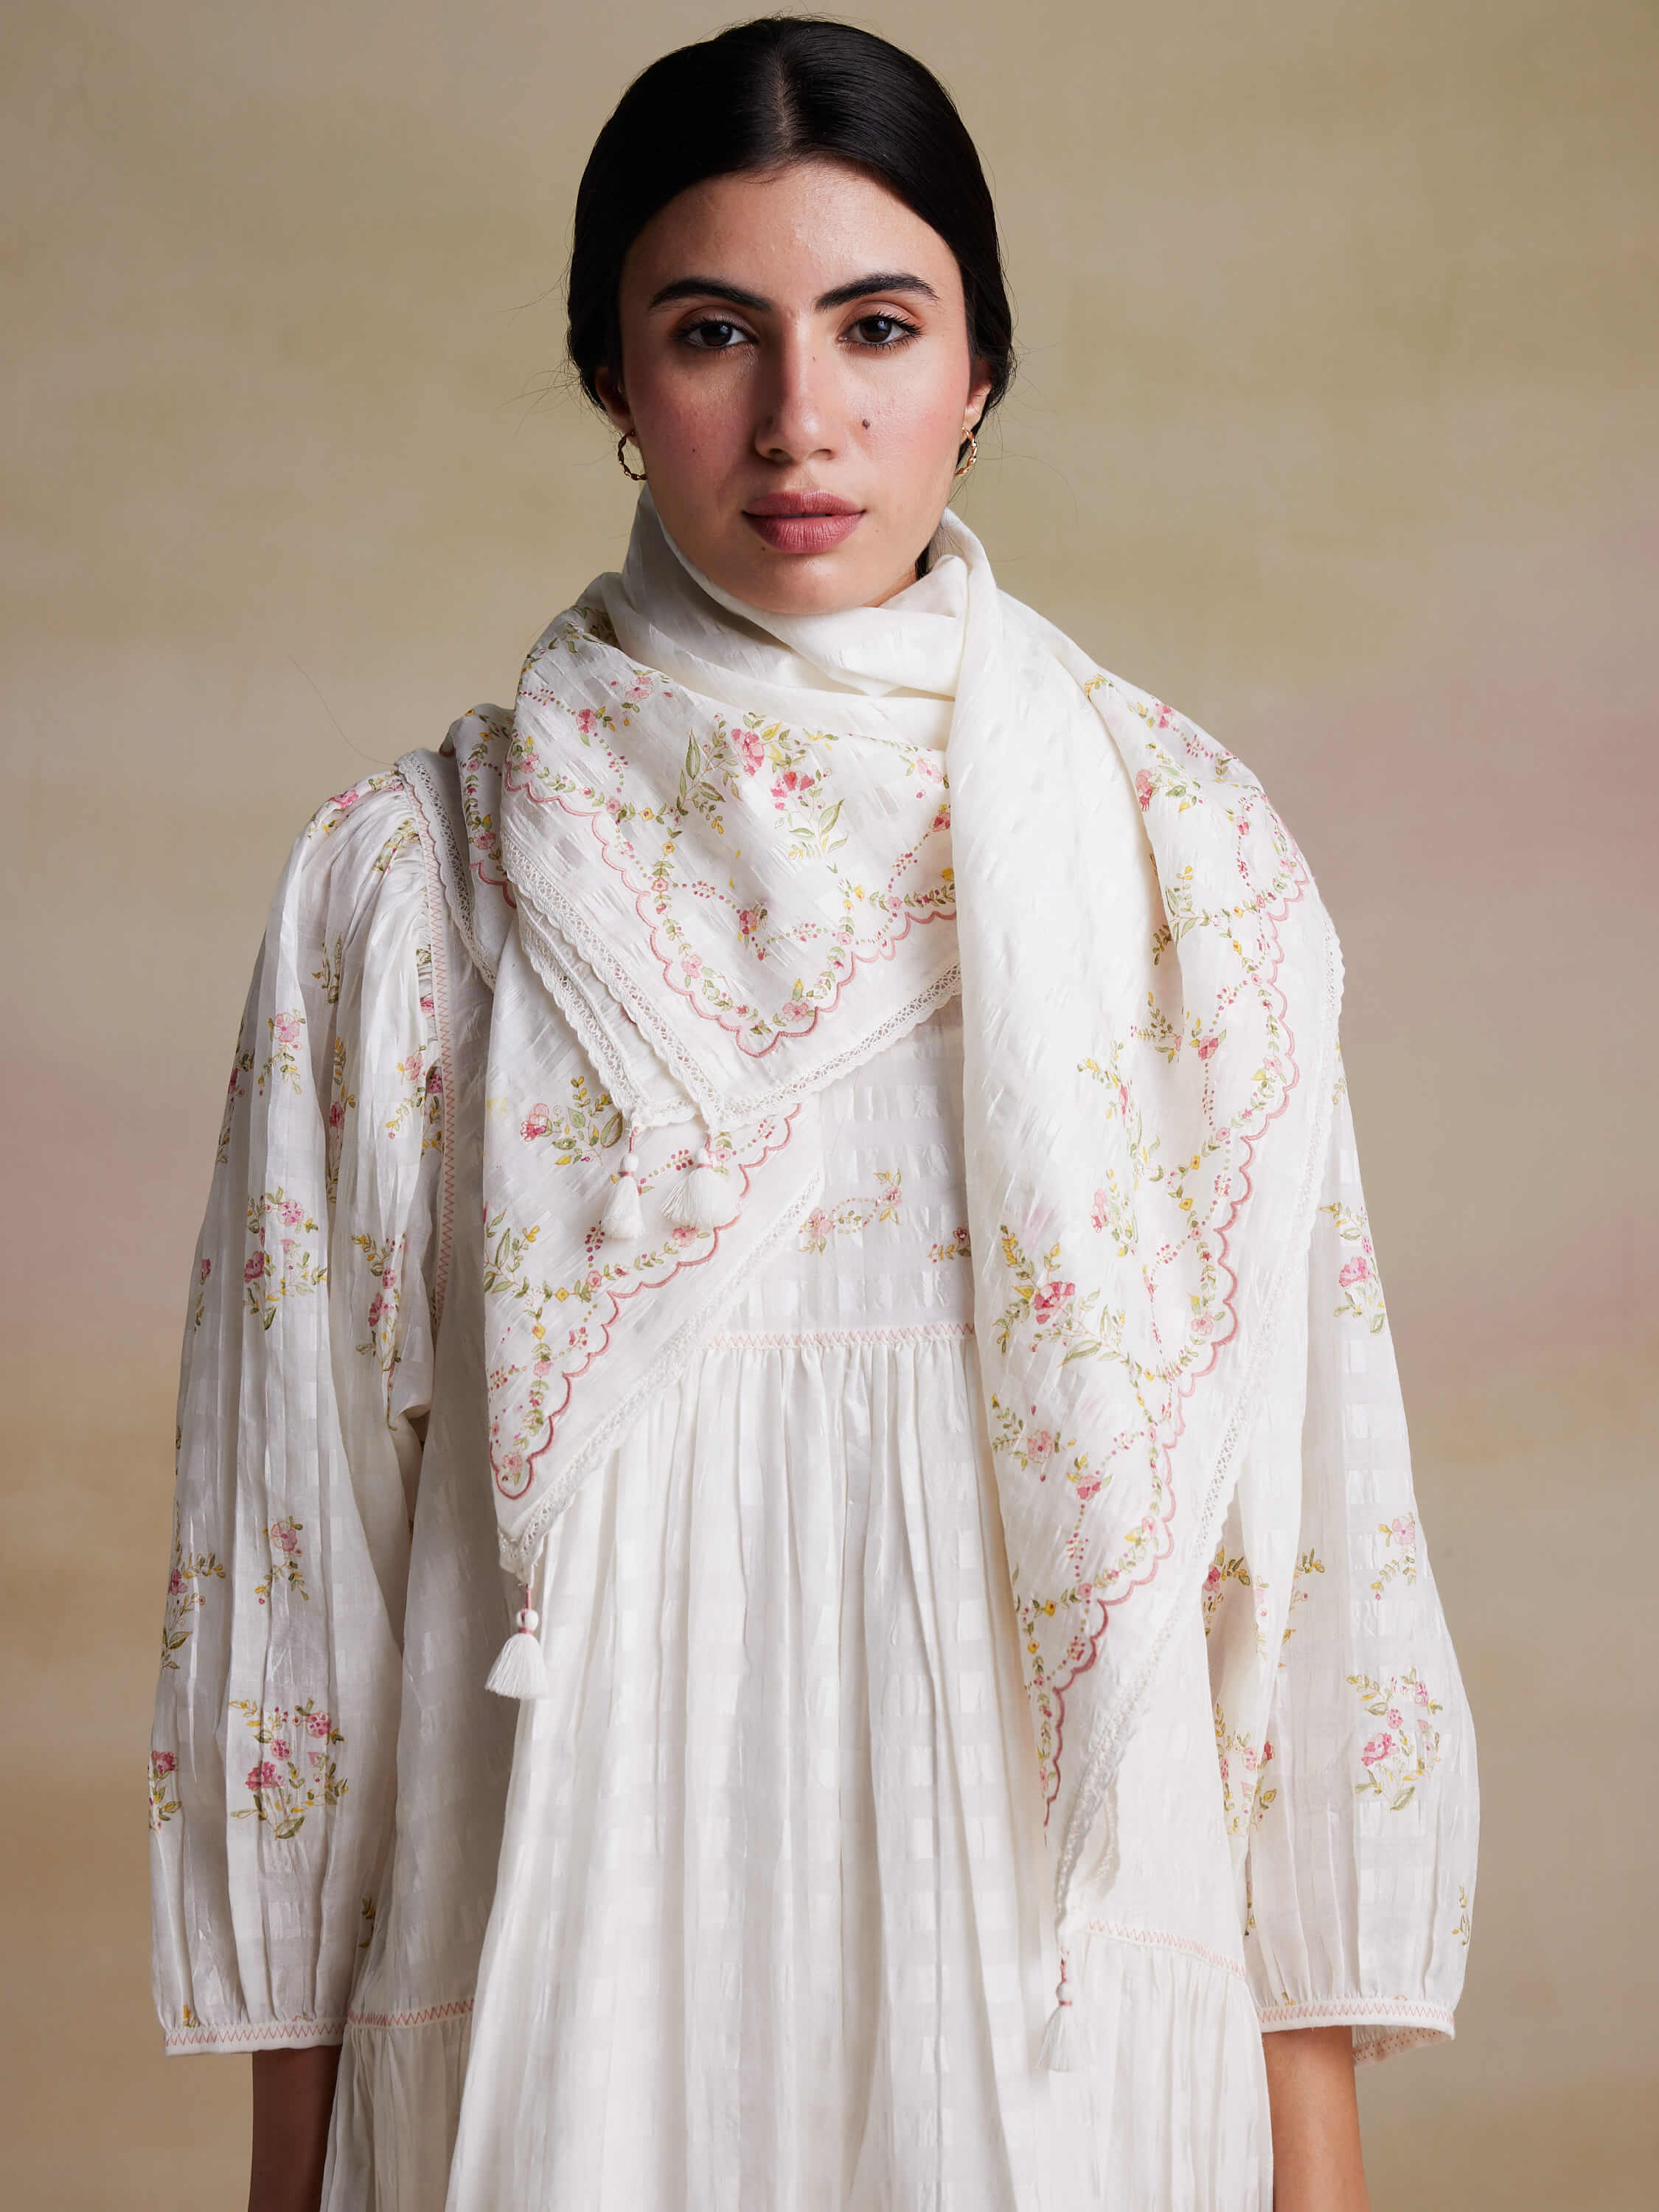 Woman in white flower-embroidered outfit and scarf against plain background.